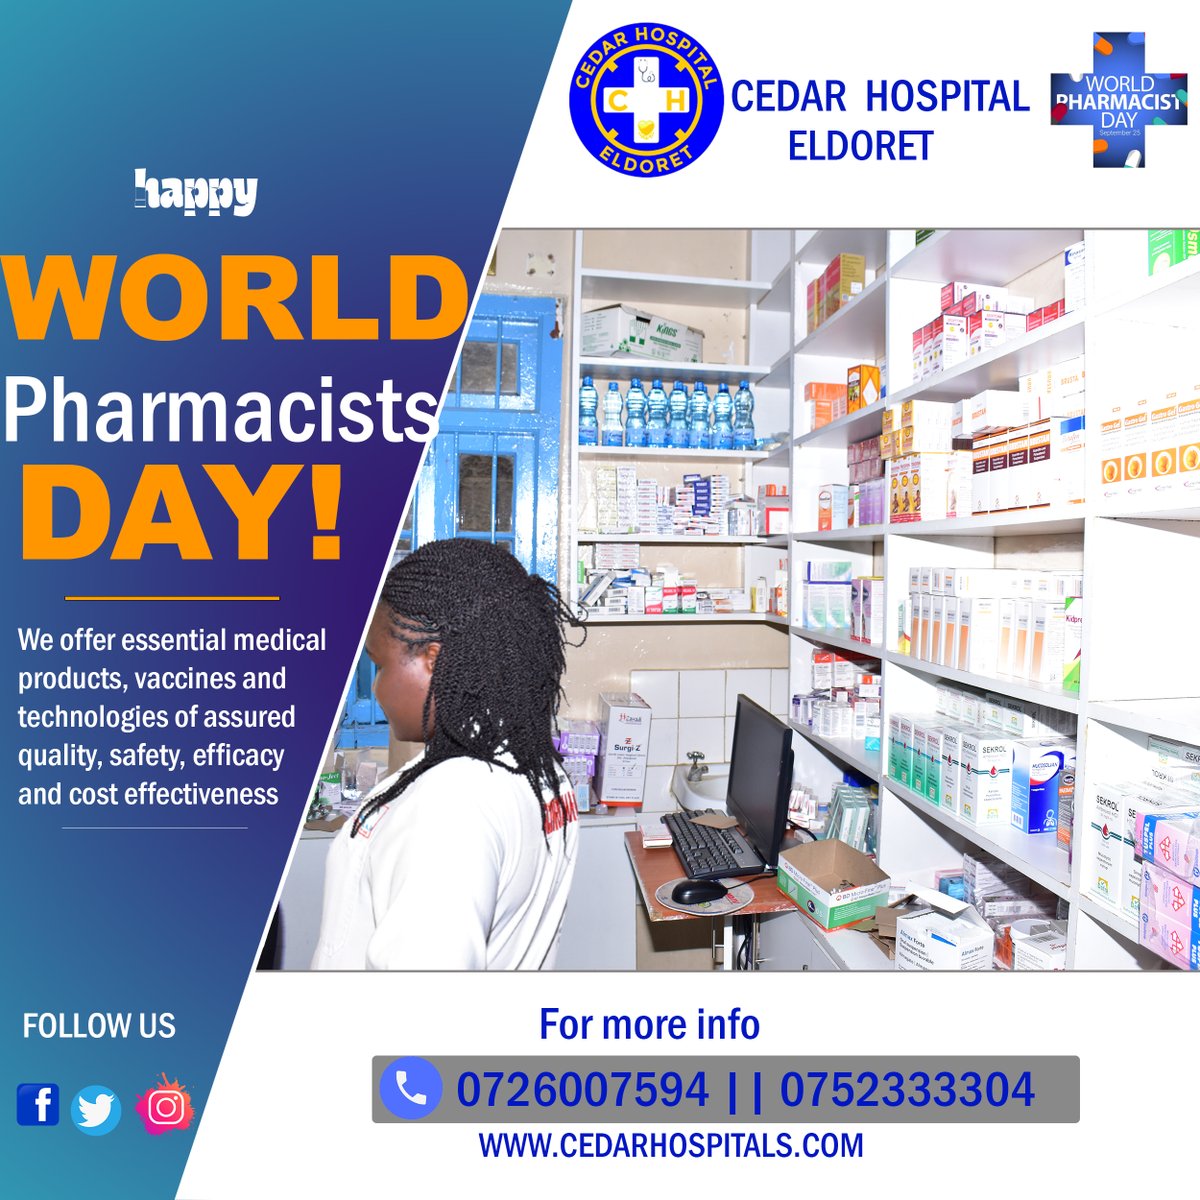 HAPPY WORLD PHARMACISTS DAY! Cedar Hospital offers essential medicalproducts, vaccines and technologies of assured quality, safety, efficacy and cost effectiveness